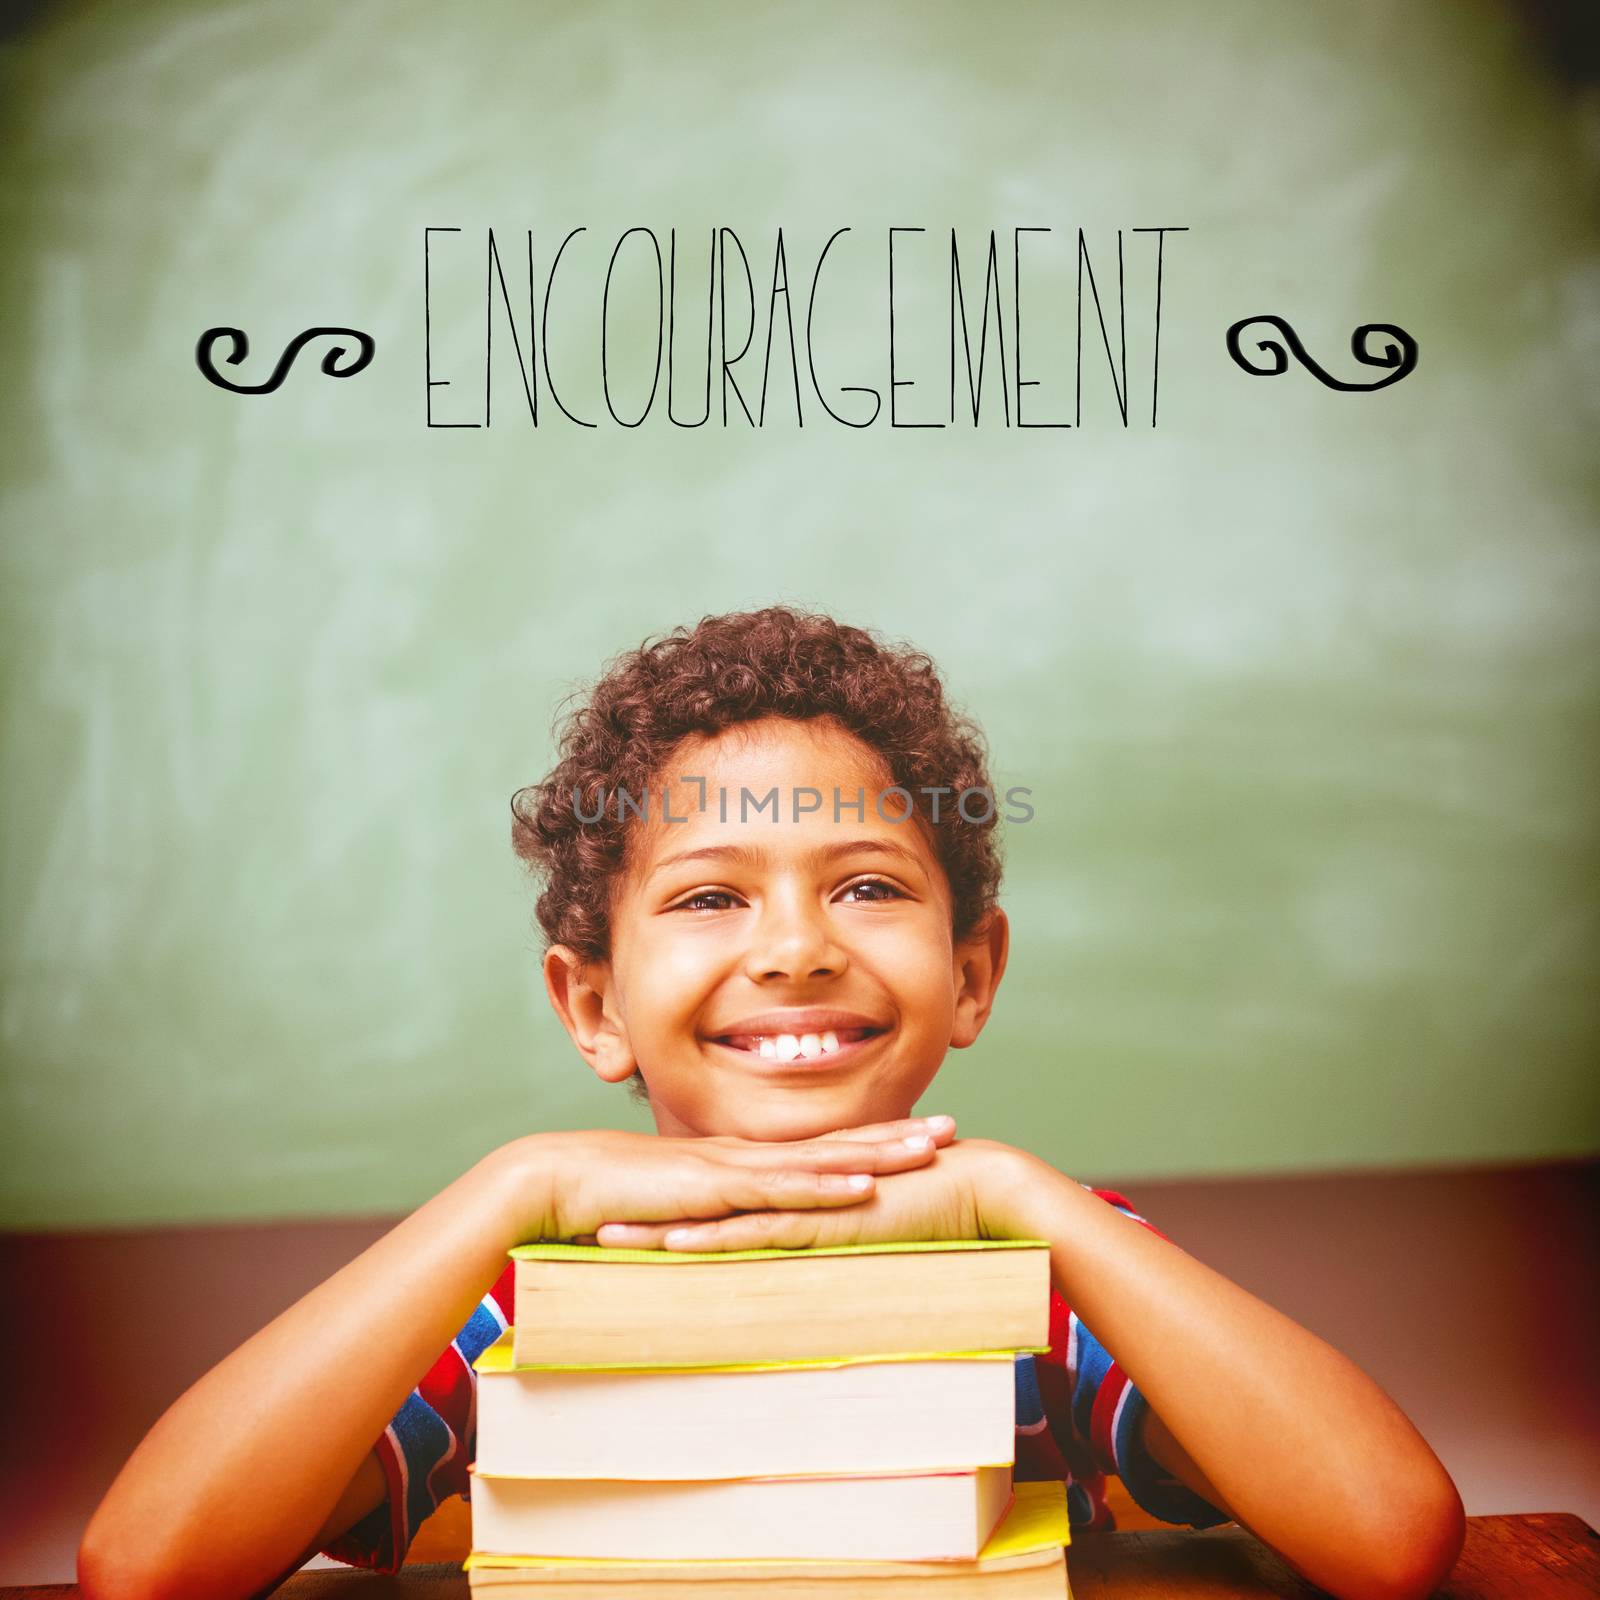 Encouragement against little boy with stack of books in classroom by Wavebreakmedia